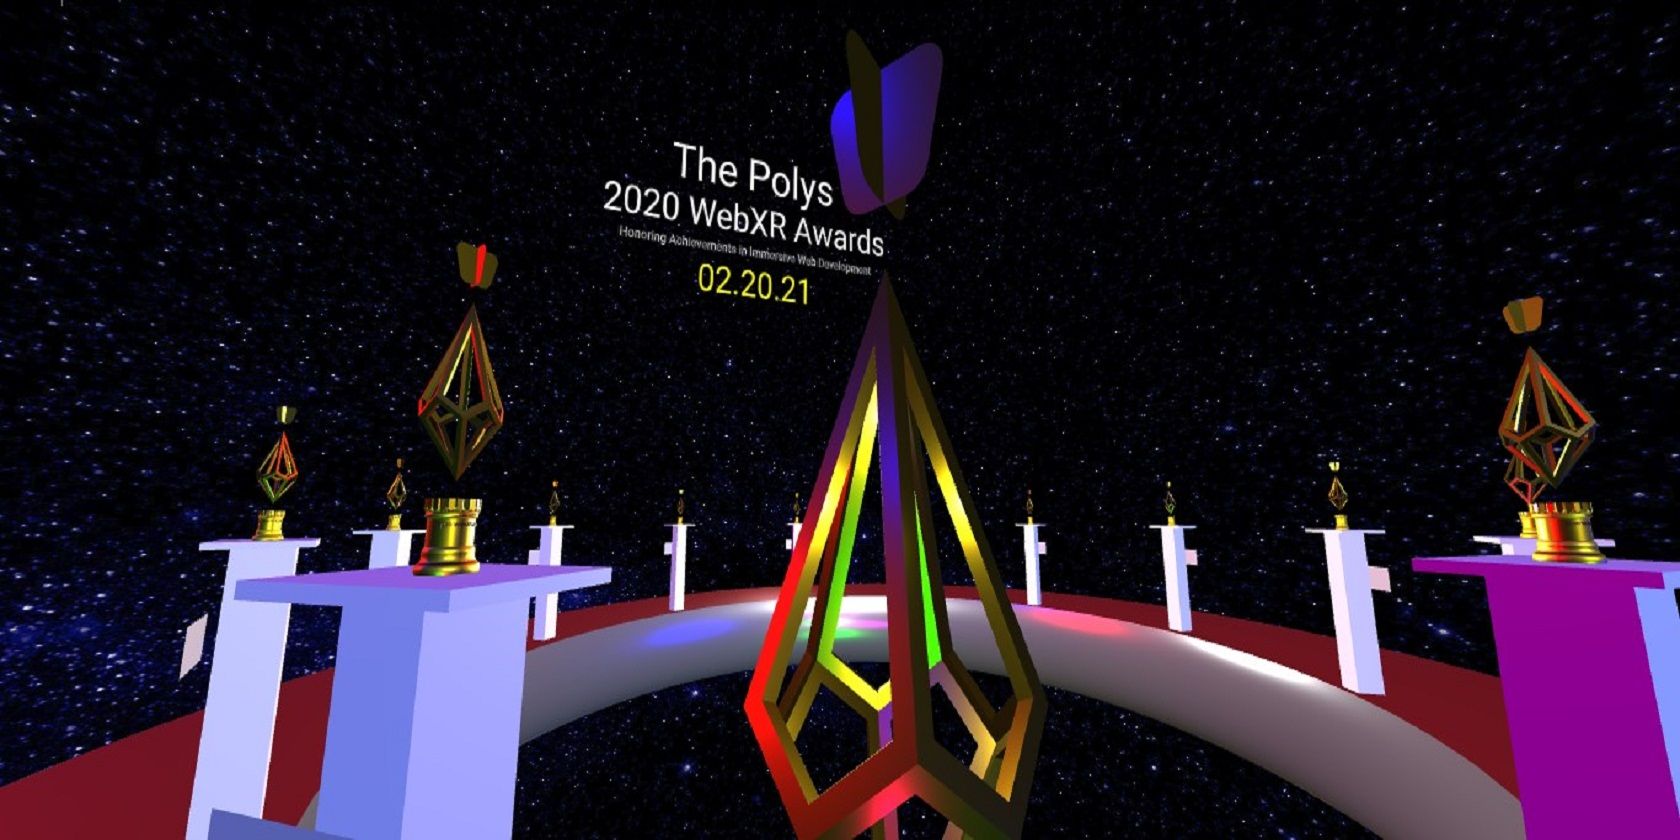 The Polys immersive web page